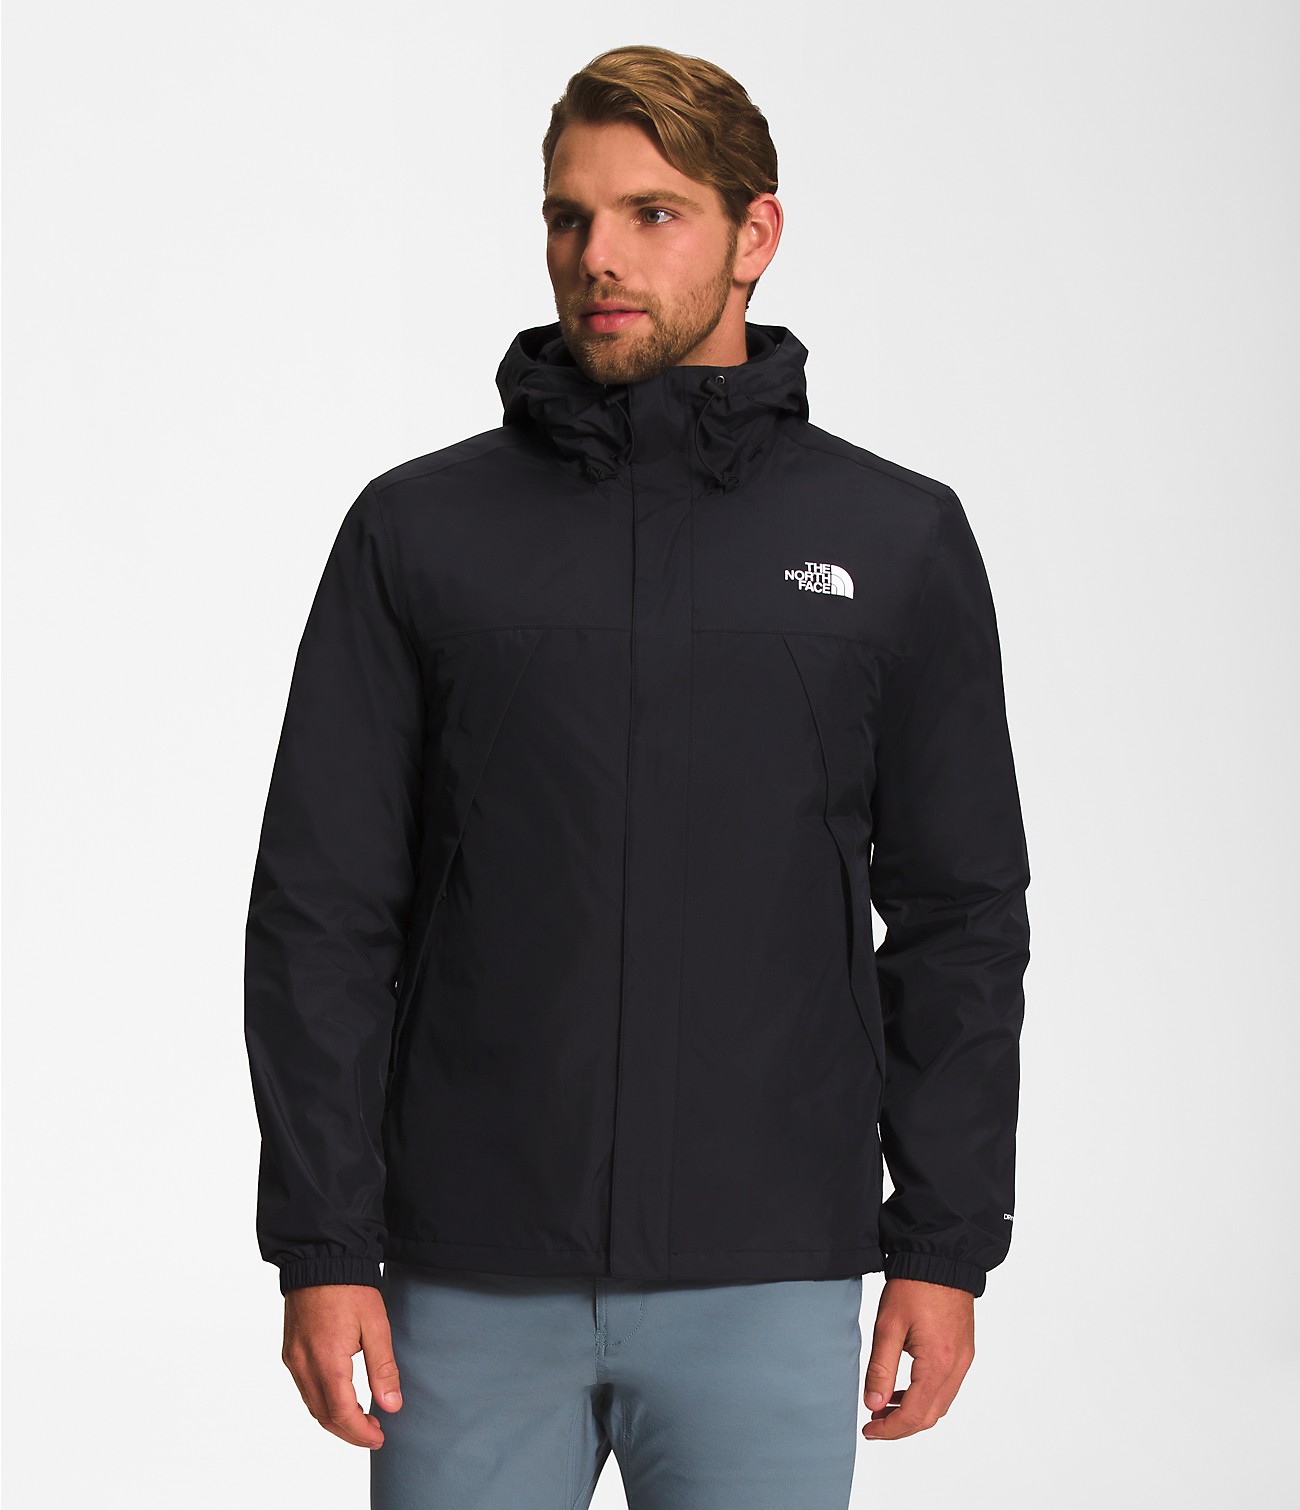 Unlock Wilderness' choice in the Superdry Vs North Face comparison, the Antora Triclimate by The North Face